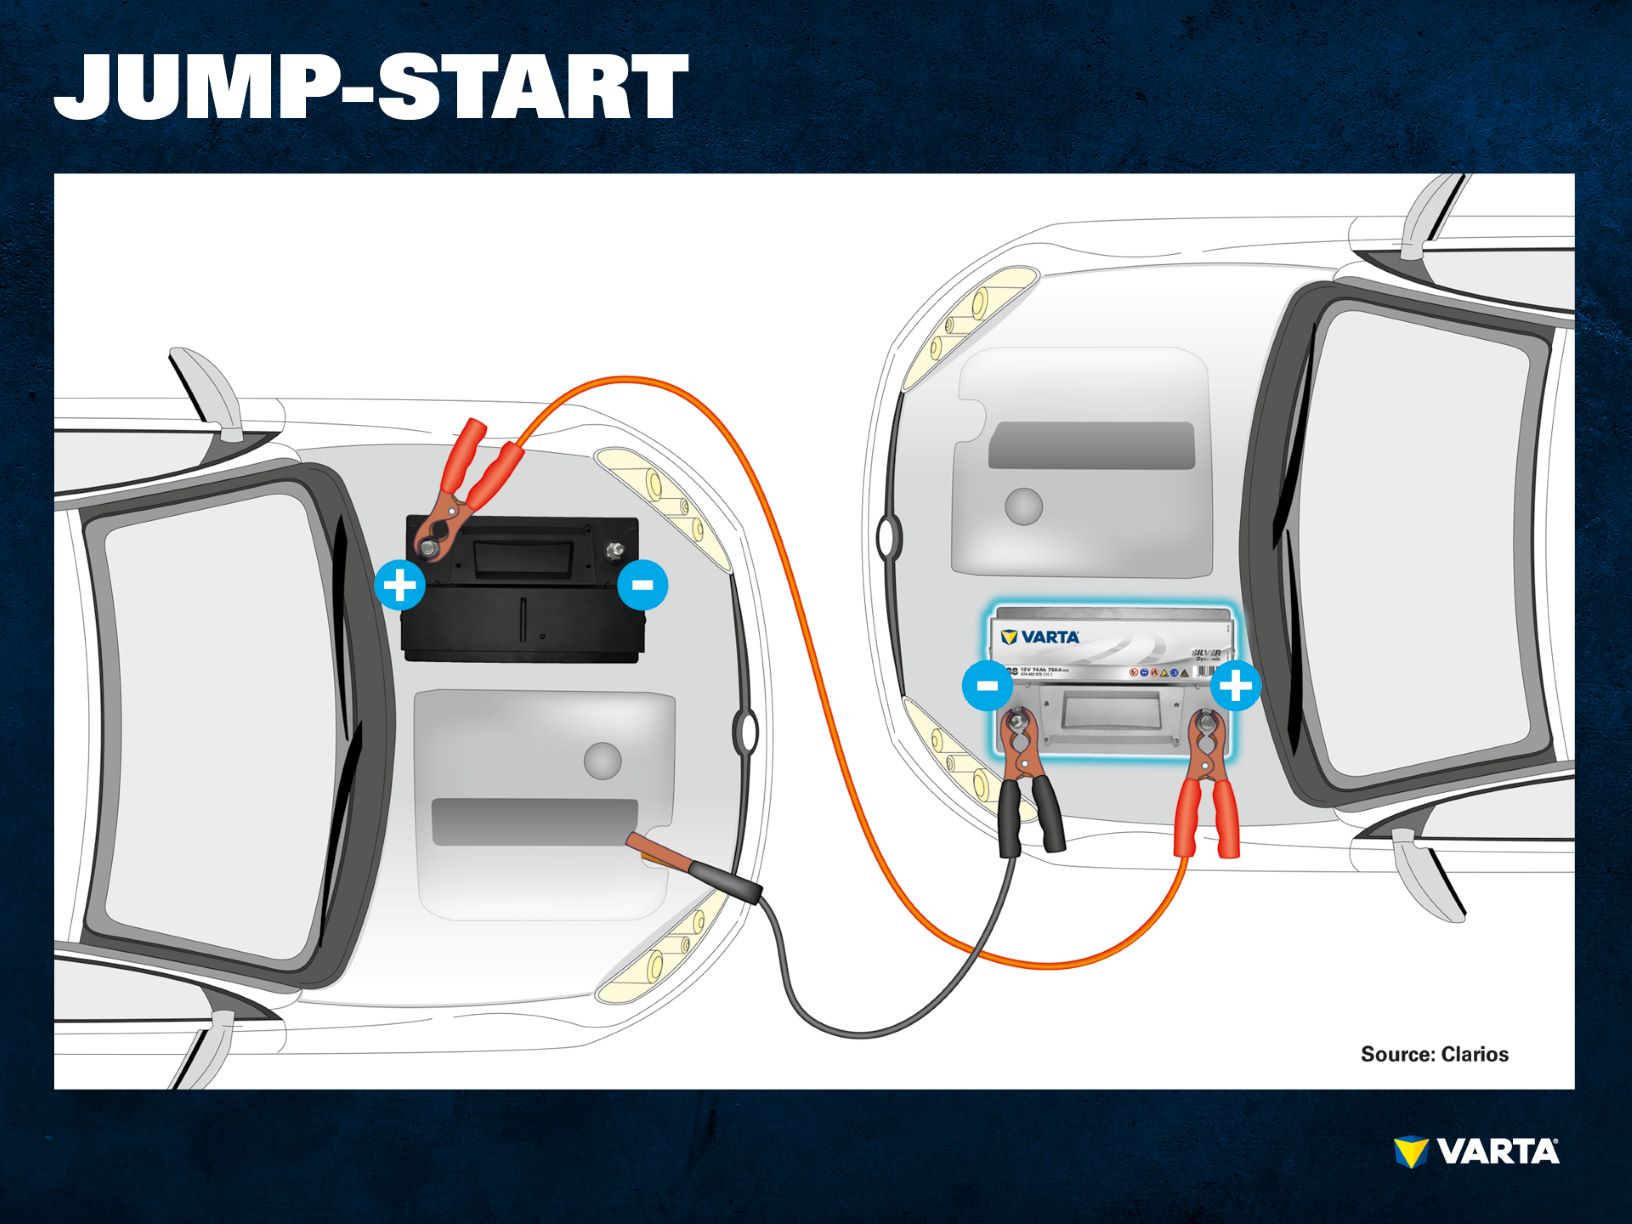 How To Use A Jump Starter Jump start a car &#8211; the step by step guide to follow!